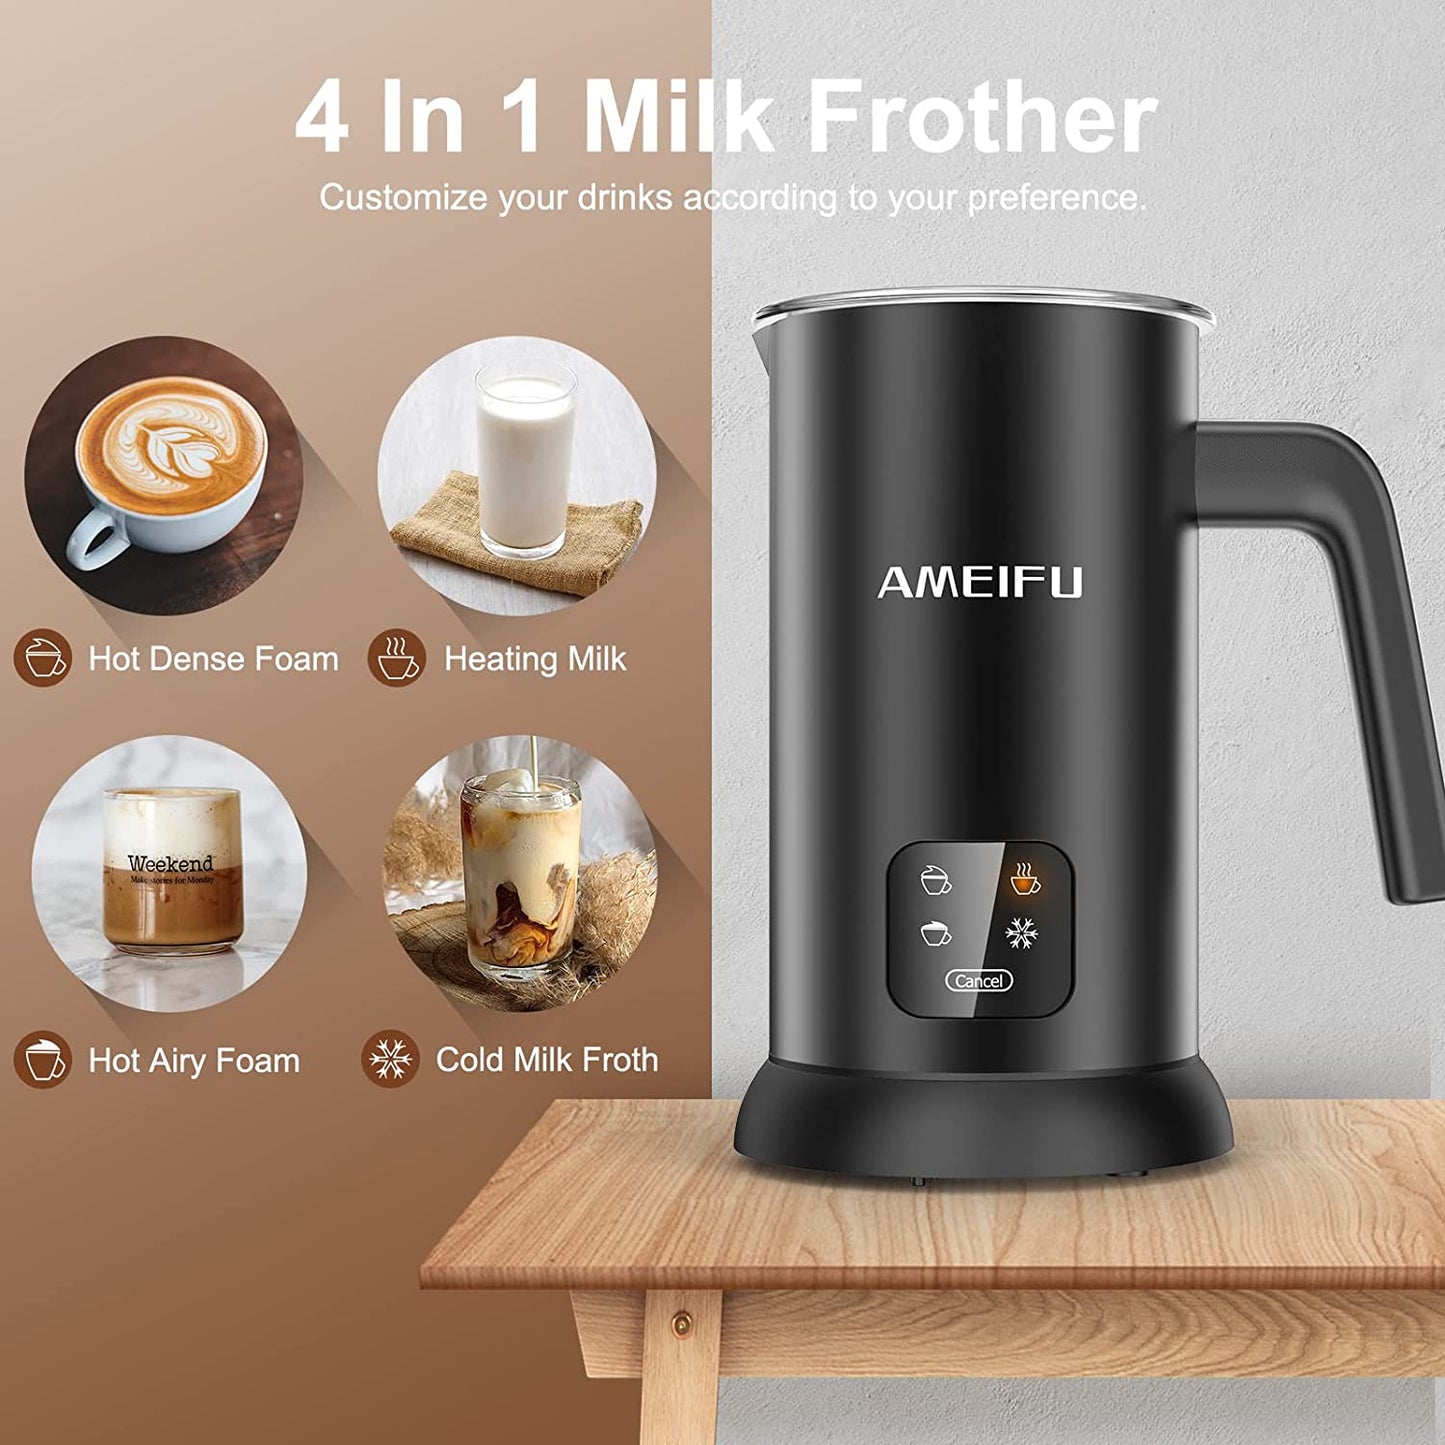 Milk Frother, Electric Milk Steamer, 10.1oz/300ml Automatic Hot & Cold Foam Maker, and Milk Warmer with Two Whisks